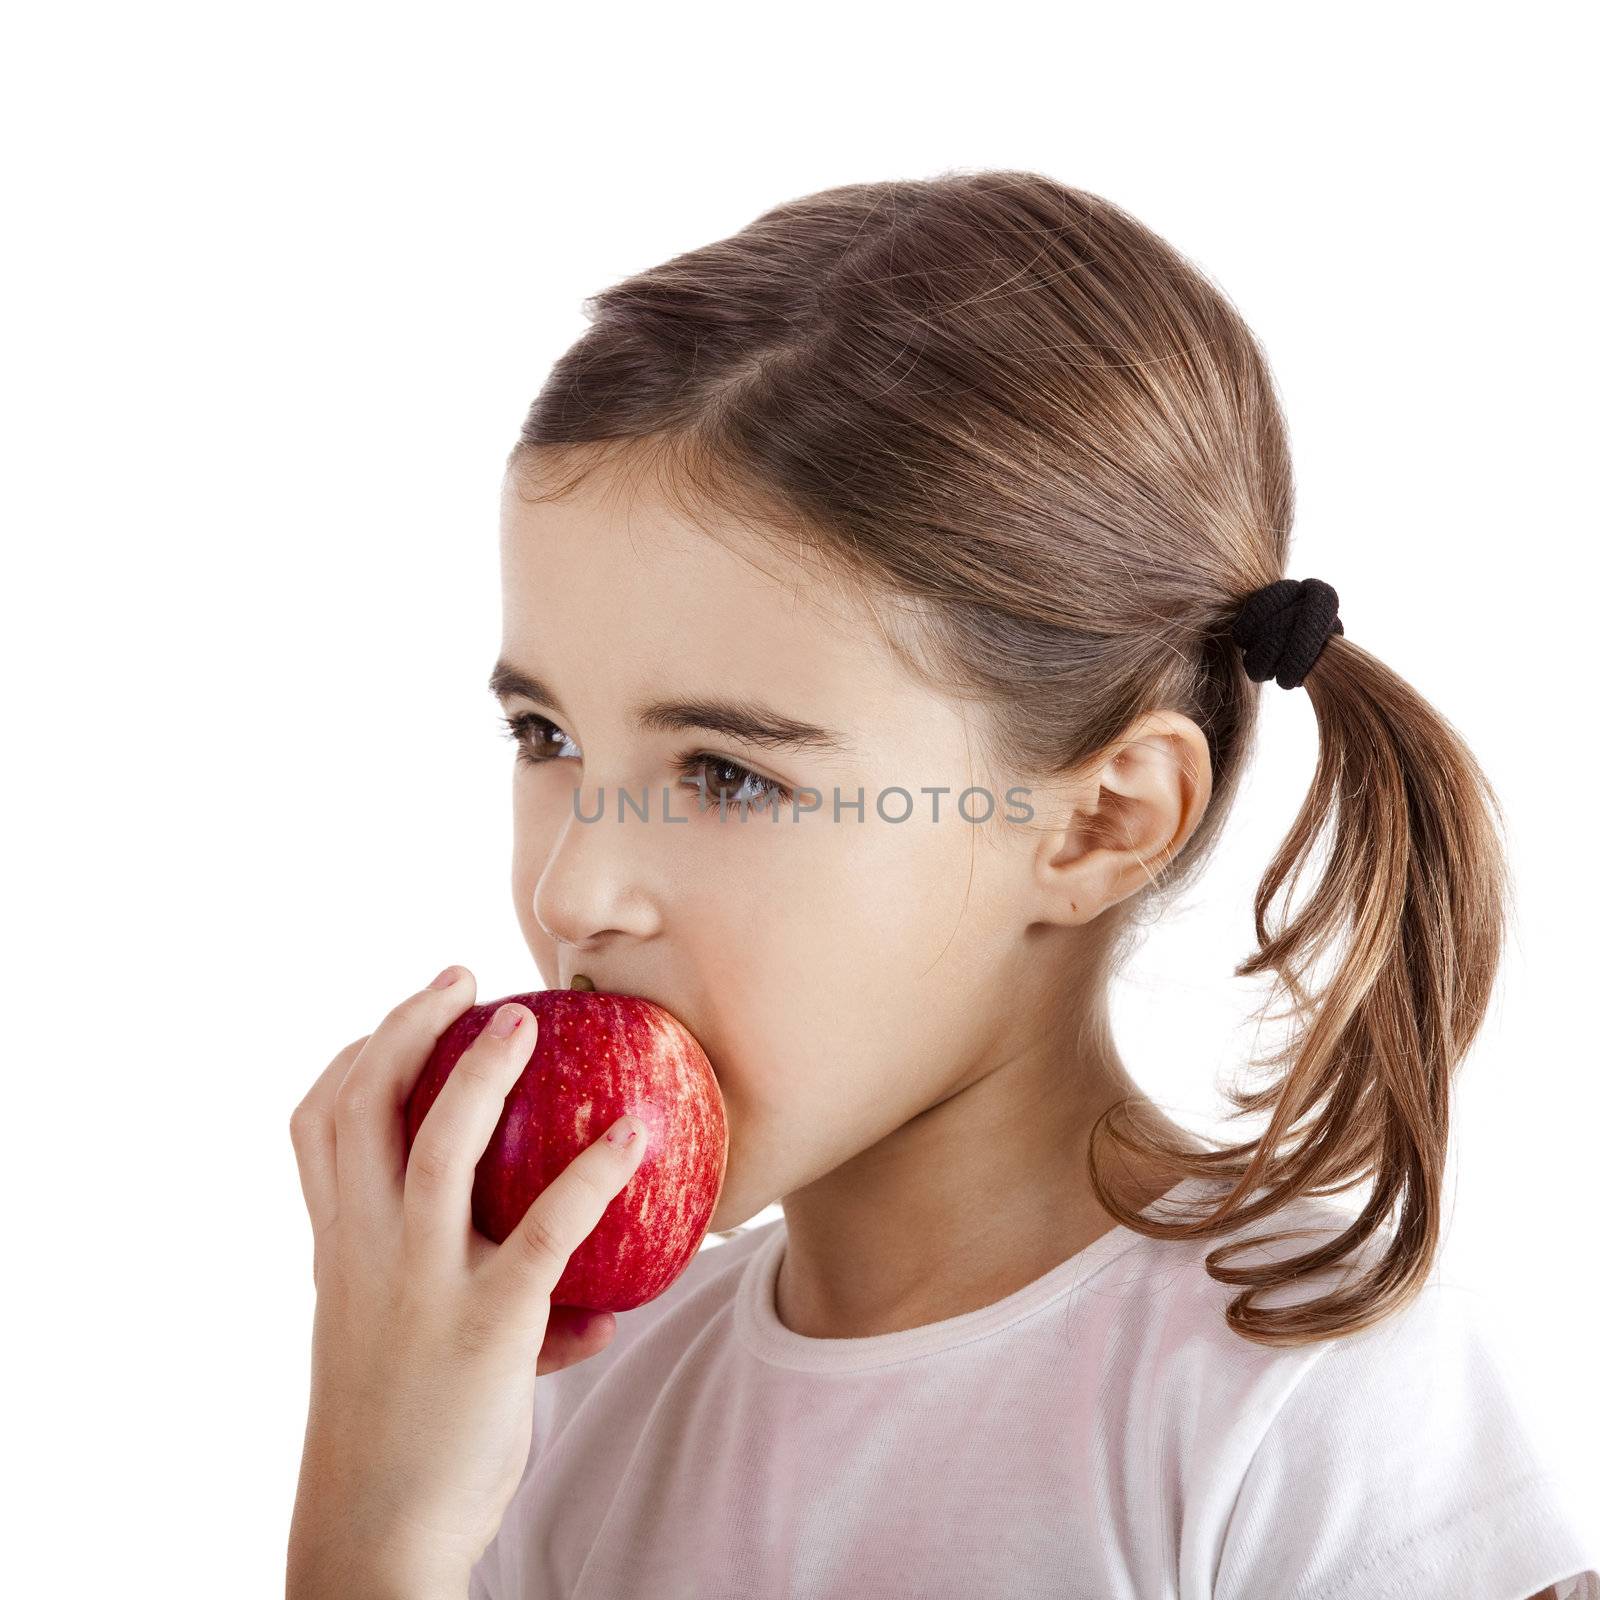 Eating an Apple by Iko